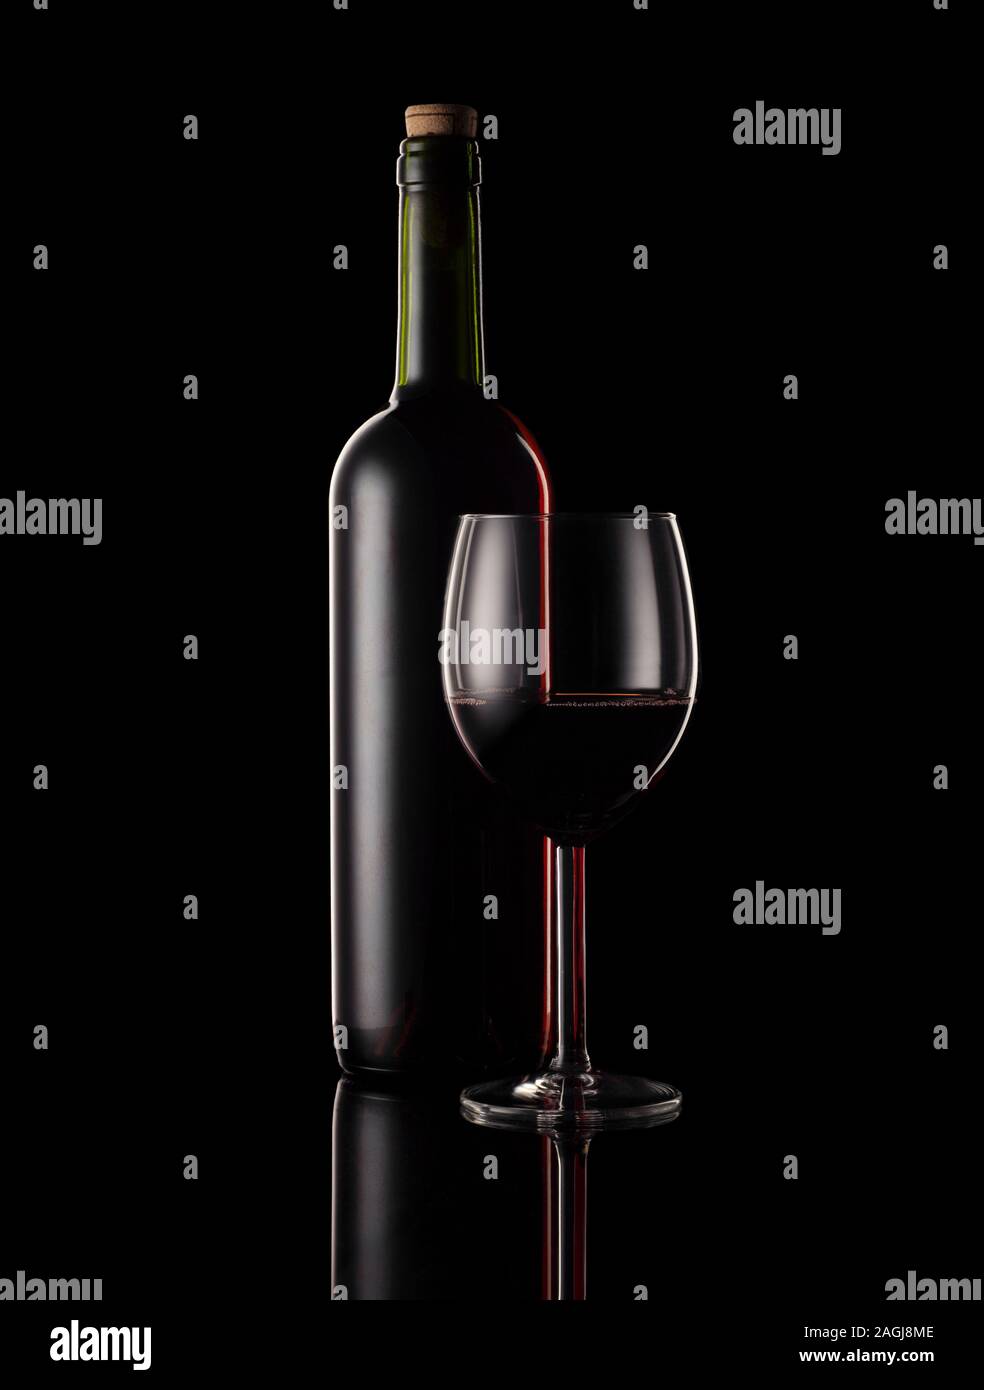 Red wine bottle and glass with black background and rim lighting. Stock Photo